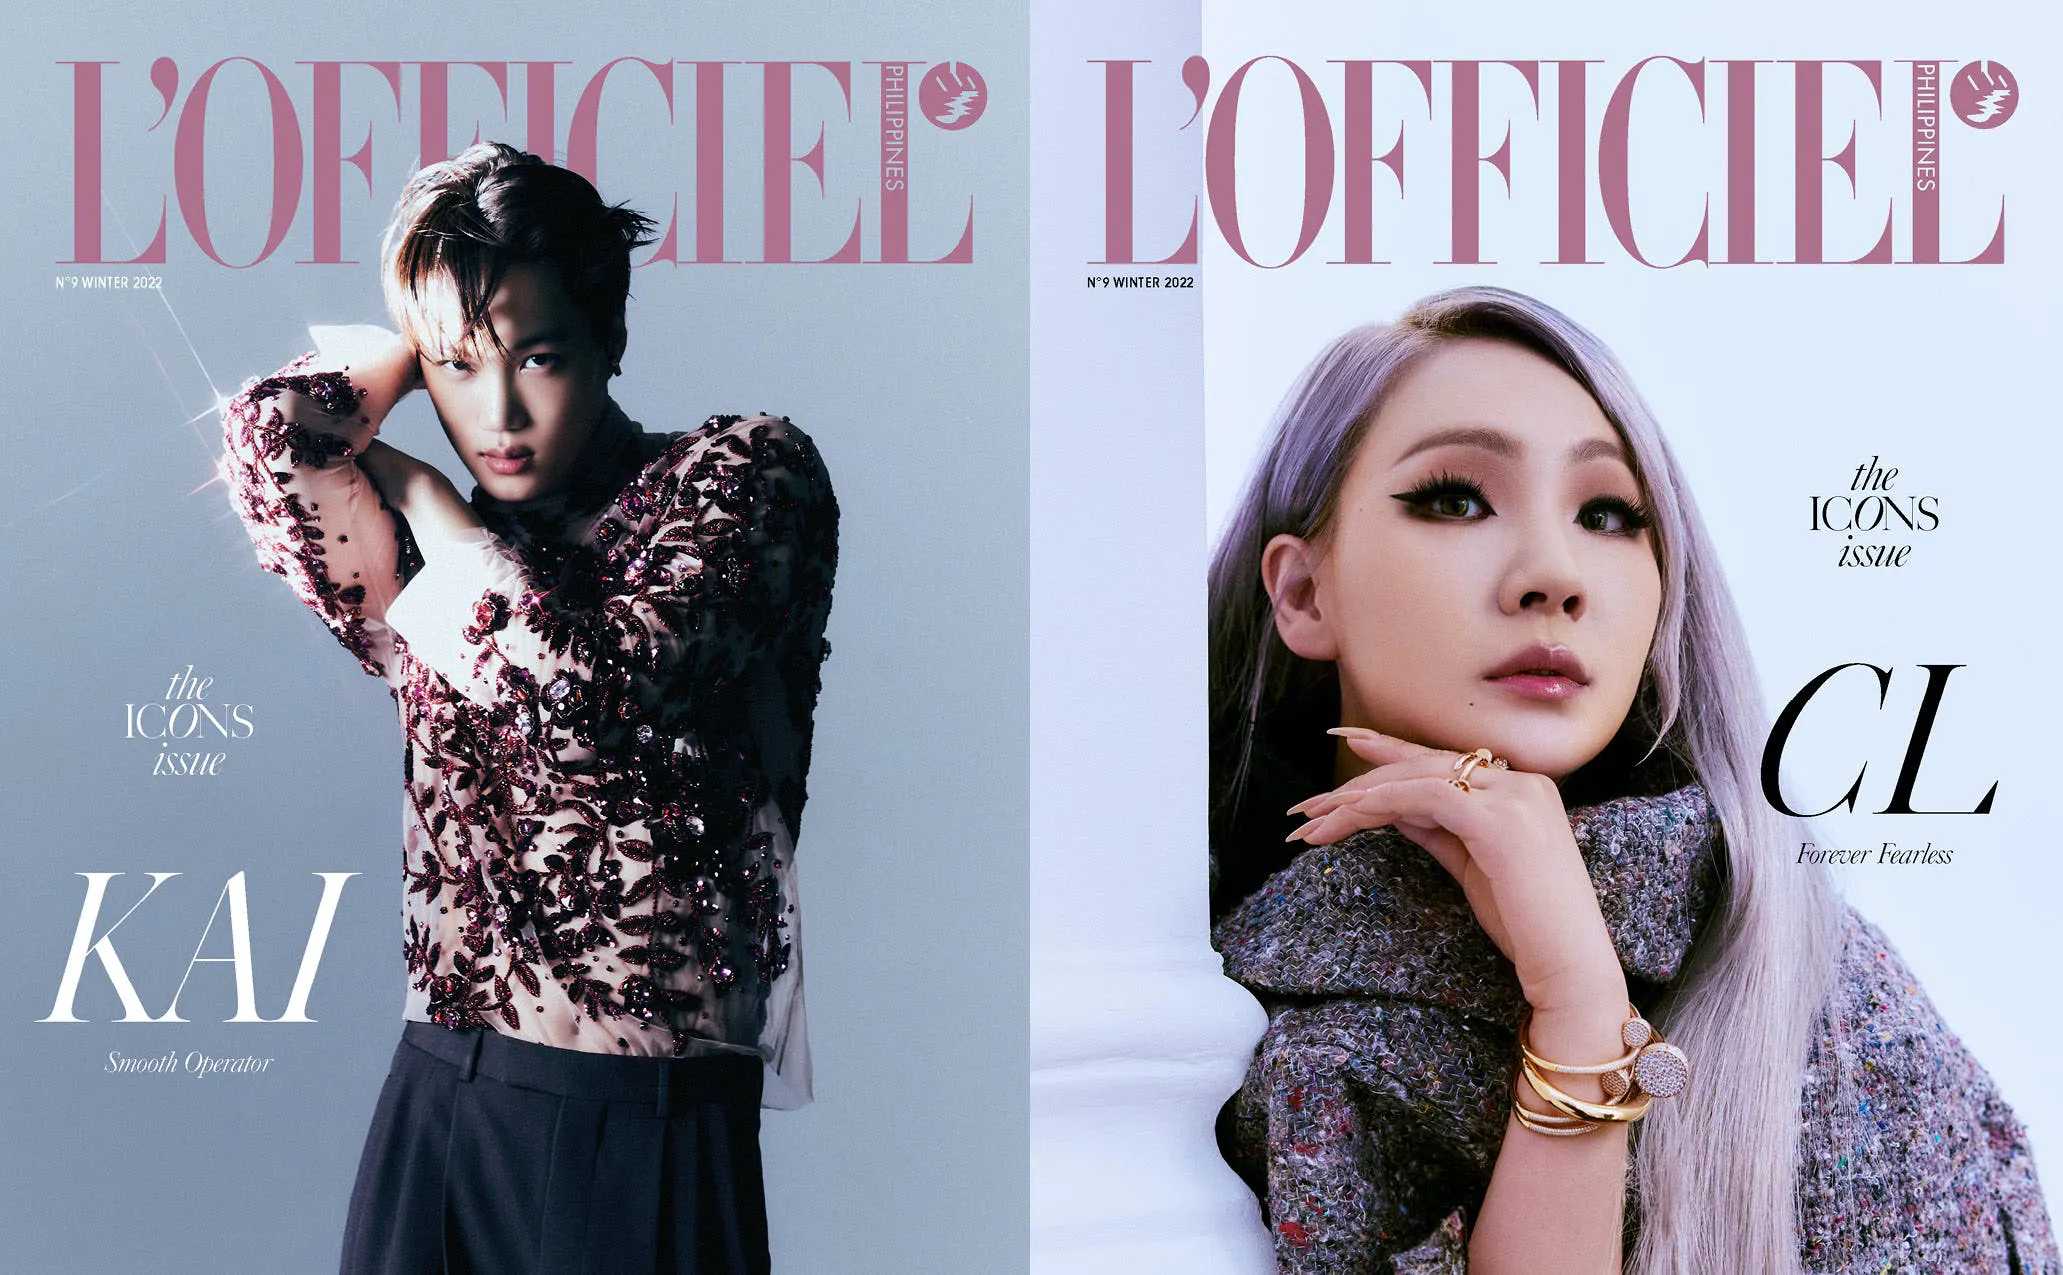 LOOK: EXO's Kai, CL stun in the cover of L'Officiel PH